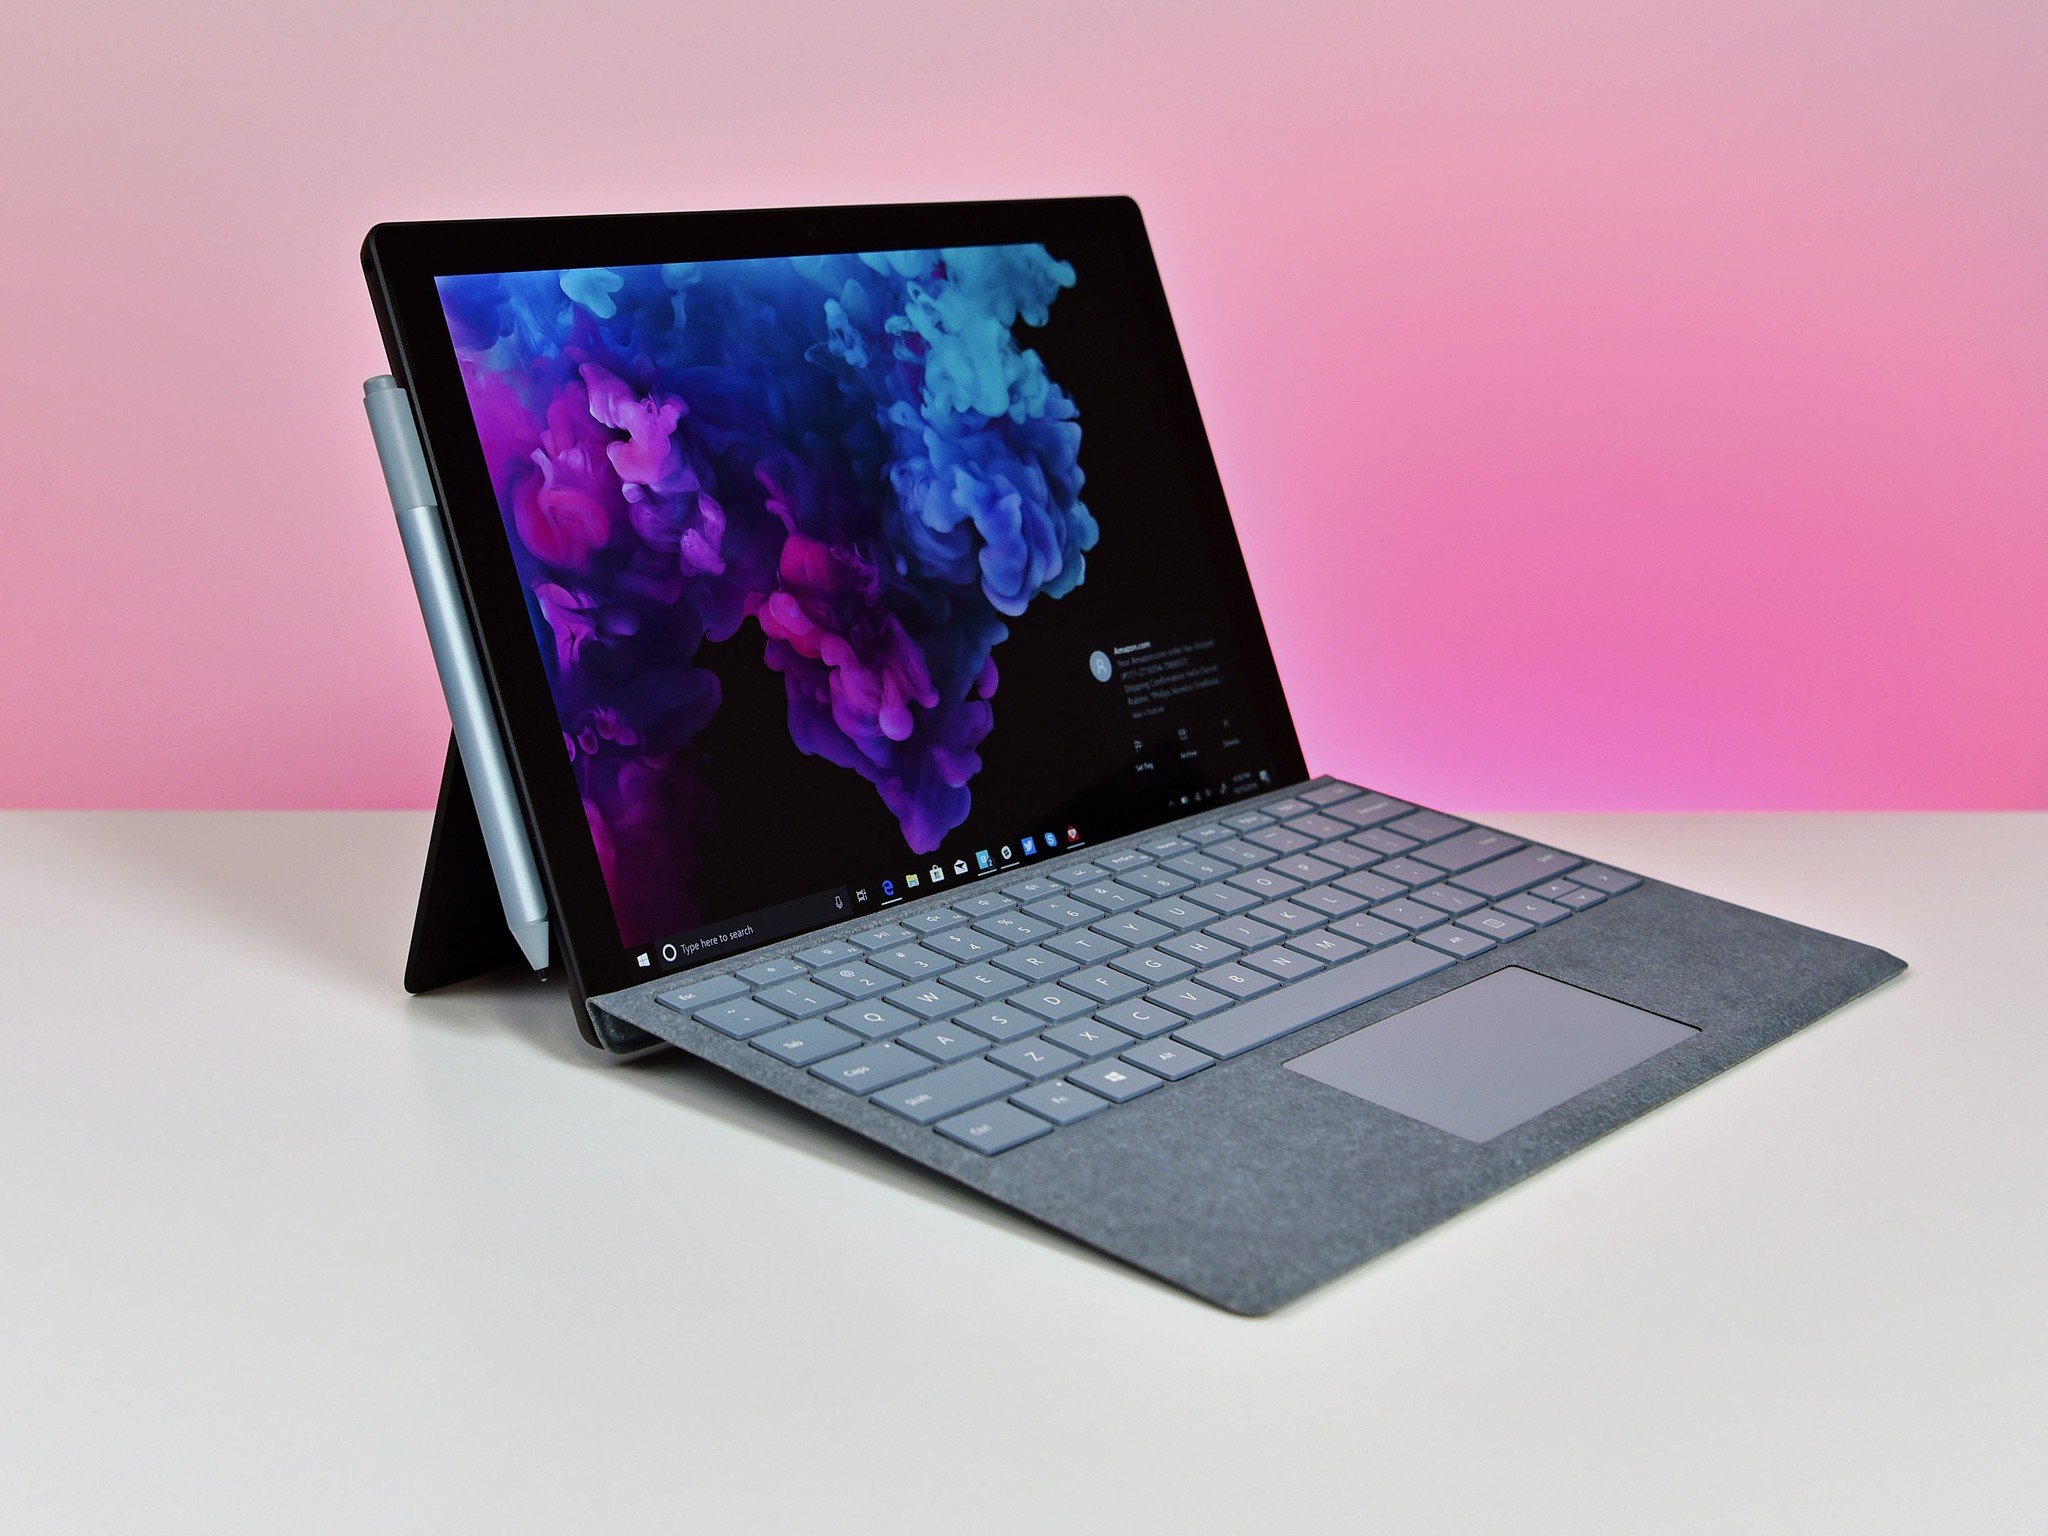 Microsoft is right not to include Windows 10 Pro with Surface Pro – here's why | Windows Central